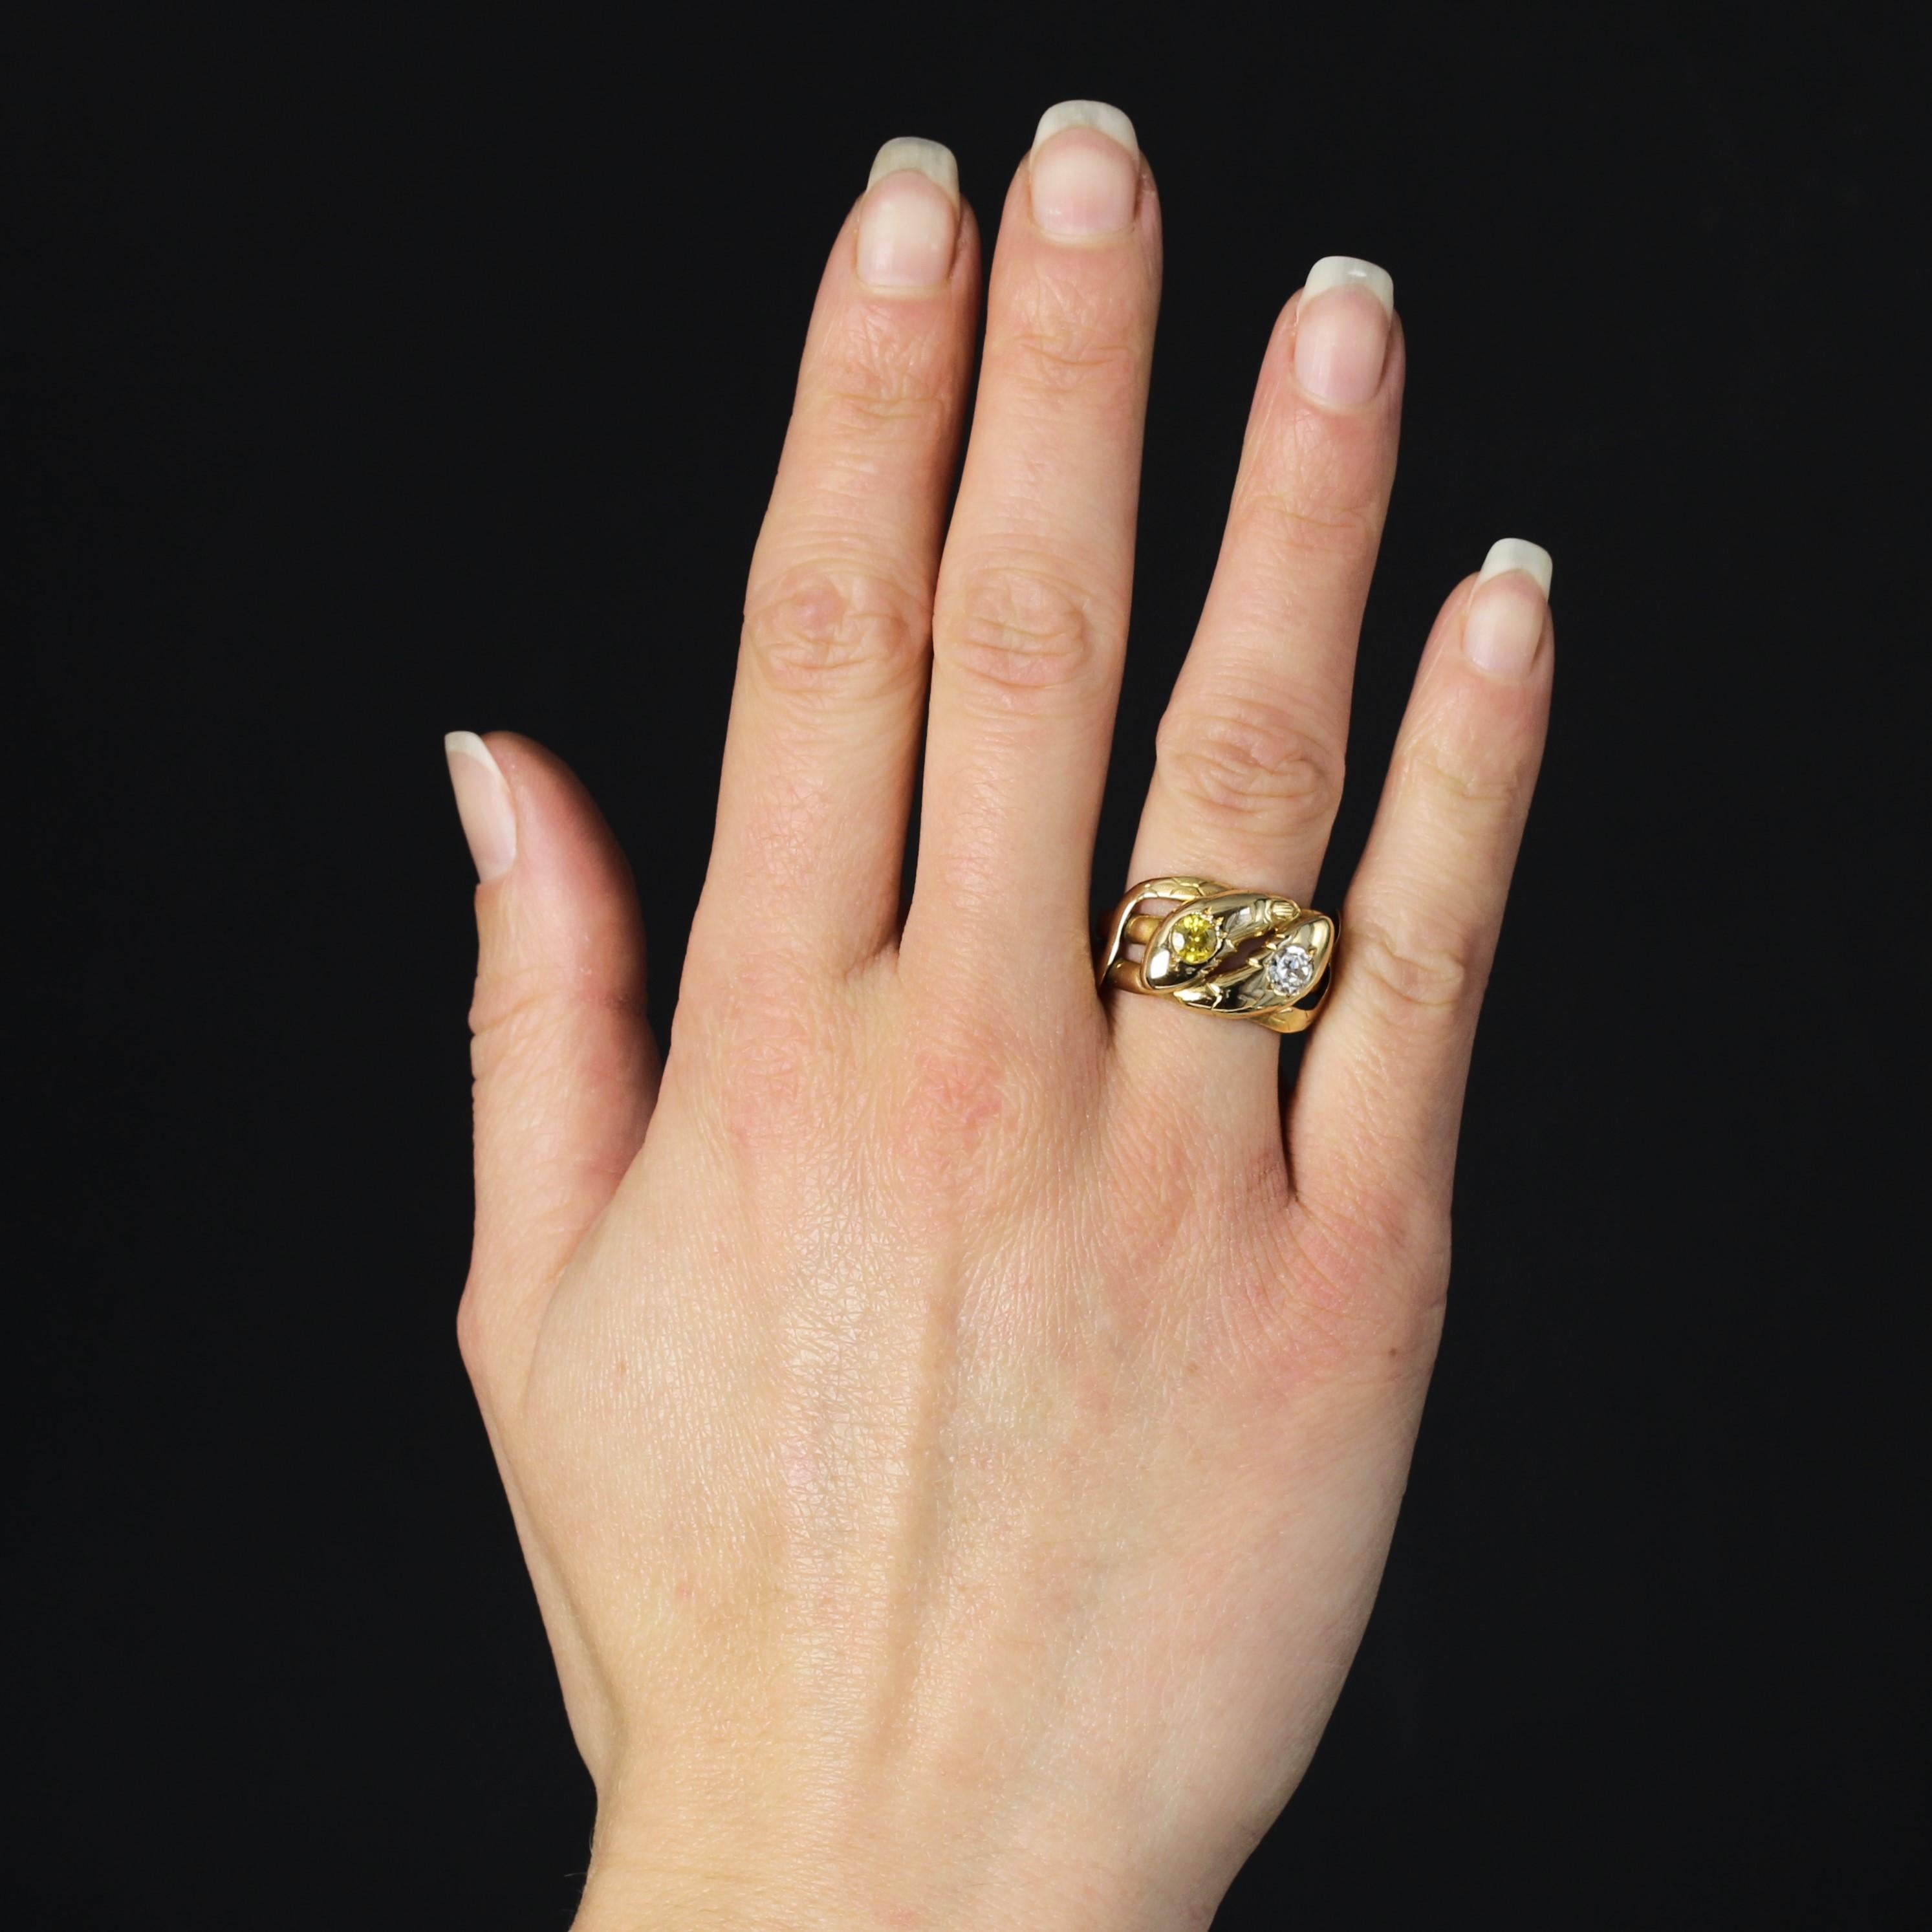 Ring in 18 karat yellow gold, owl hallmark.
The setting of this antique snake ring is formed by 2 flat rings forming the animals' bodies, which curl over the top, ending in a motif representing their heads and tails. One of the heads is set with a